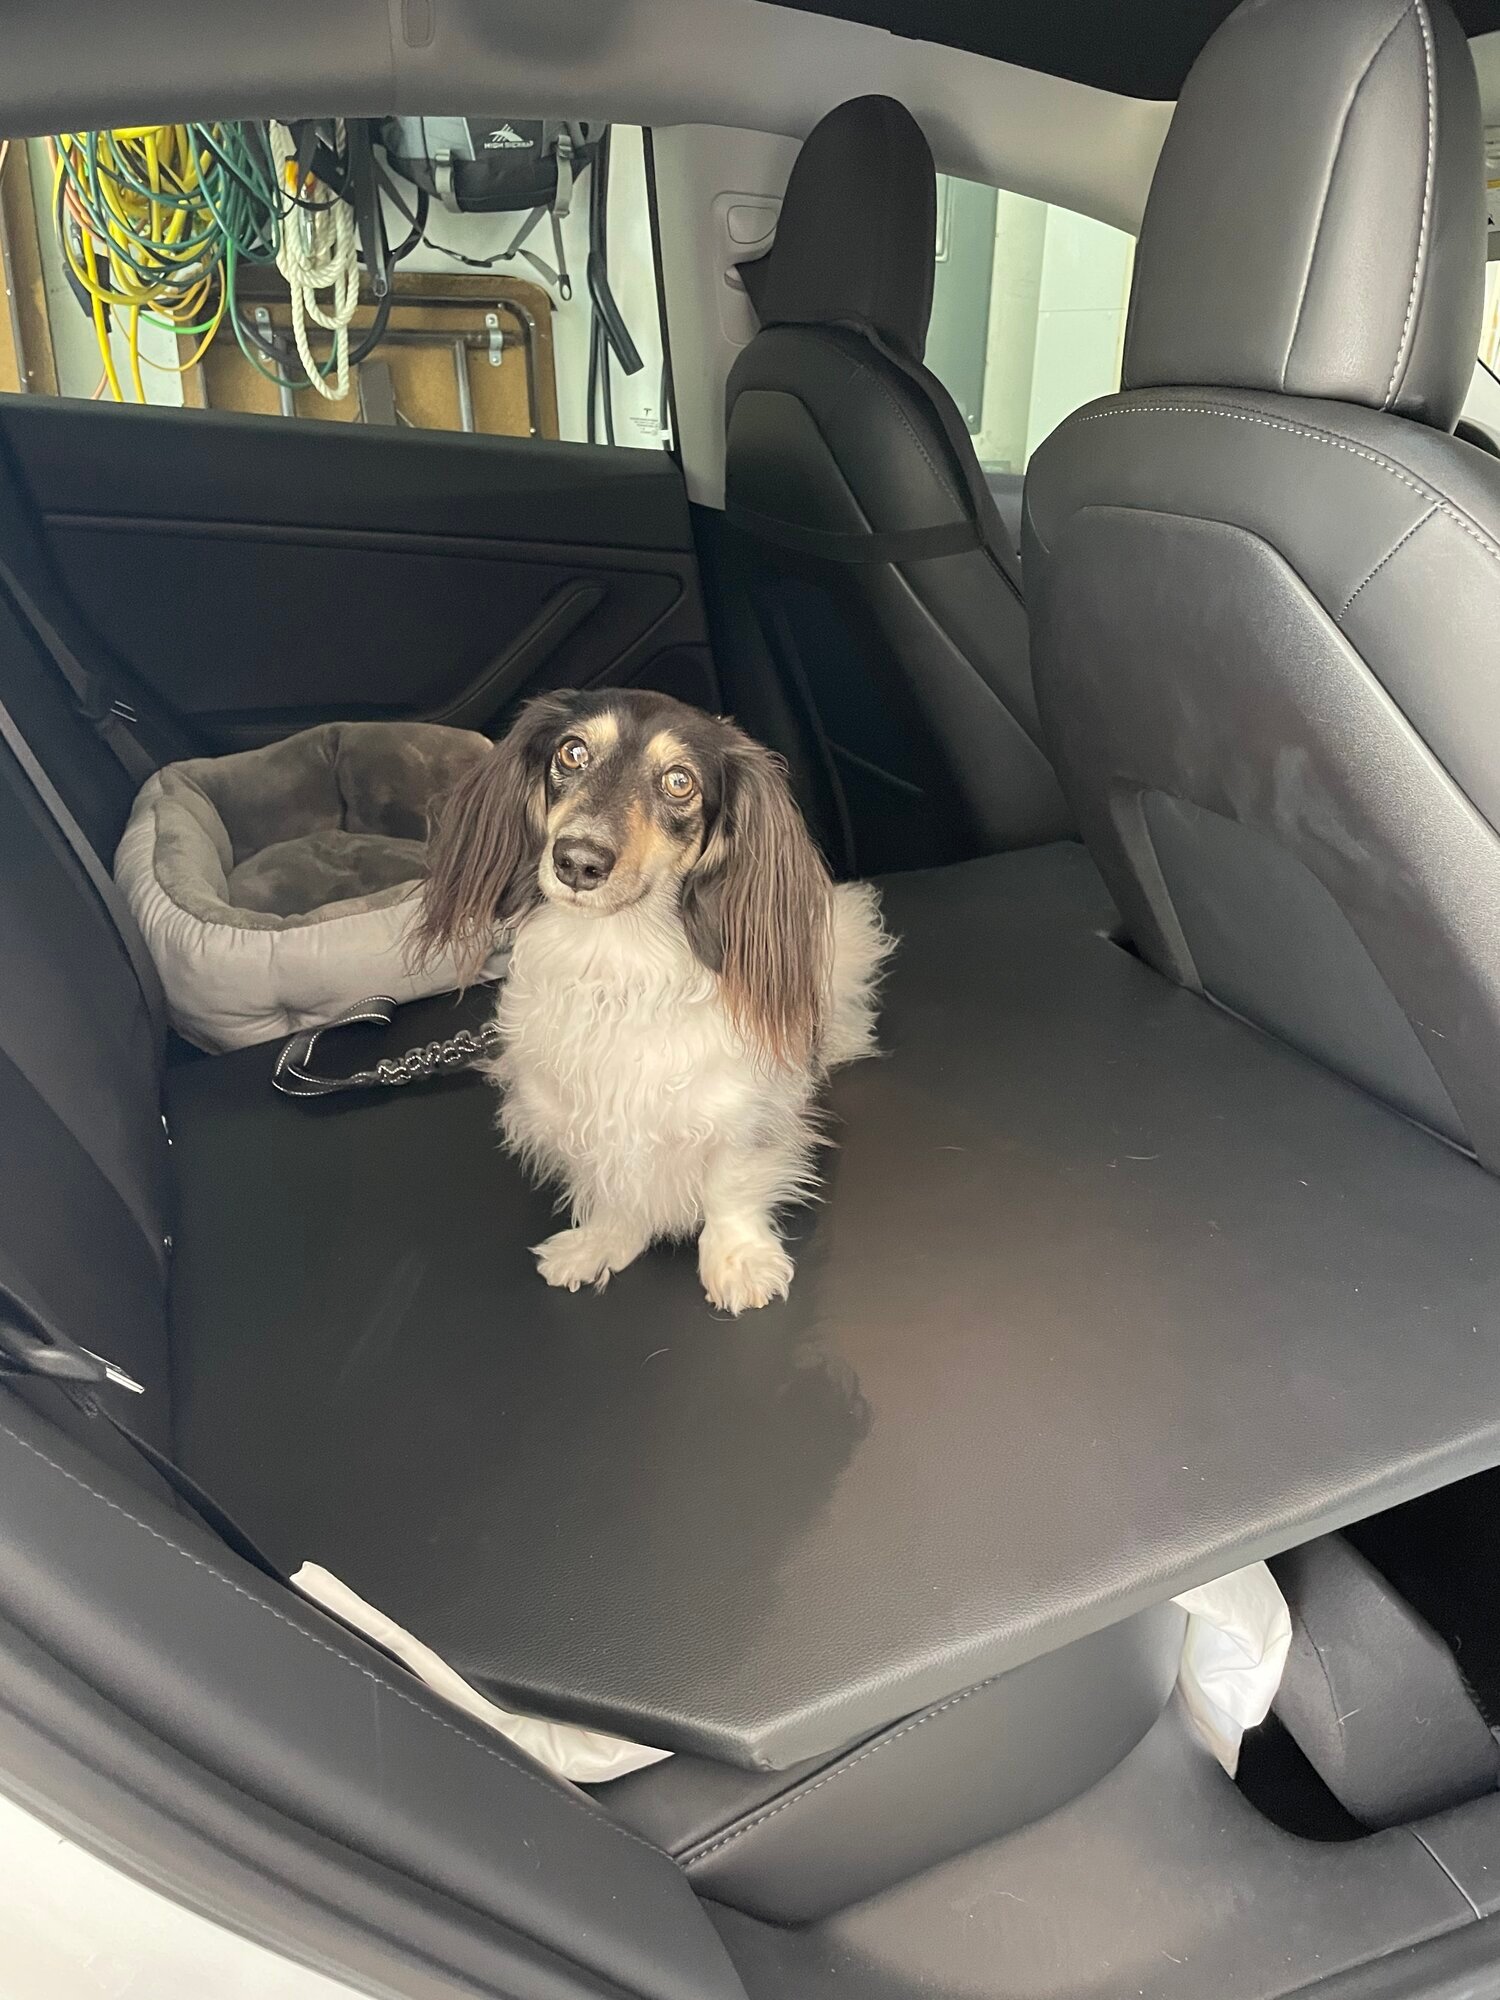 Homemade center console/dog seat